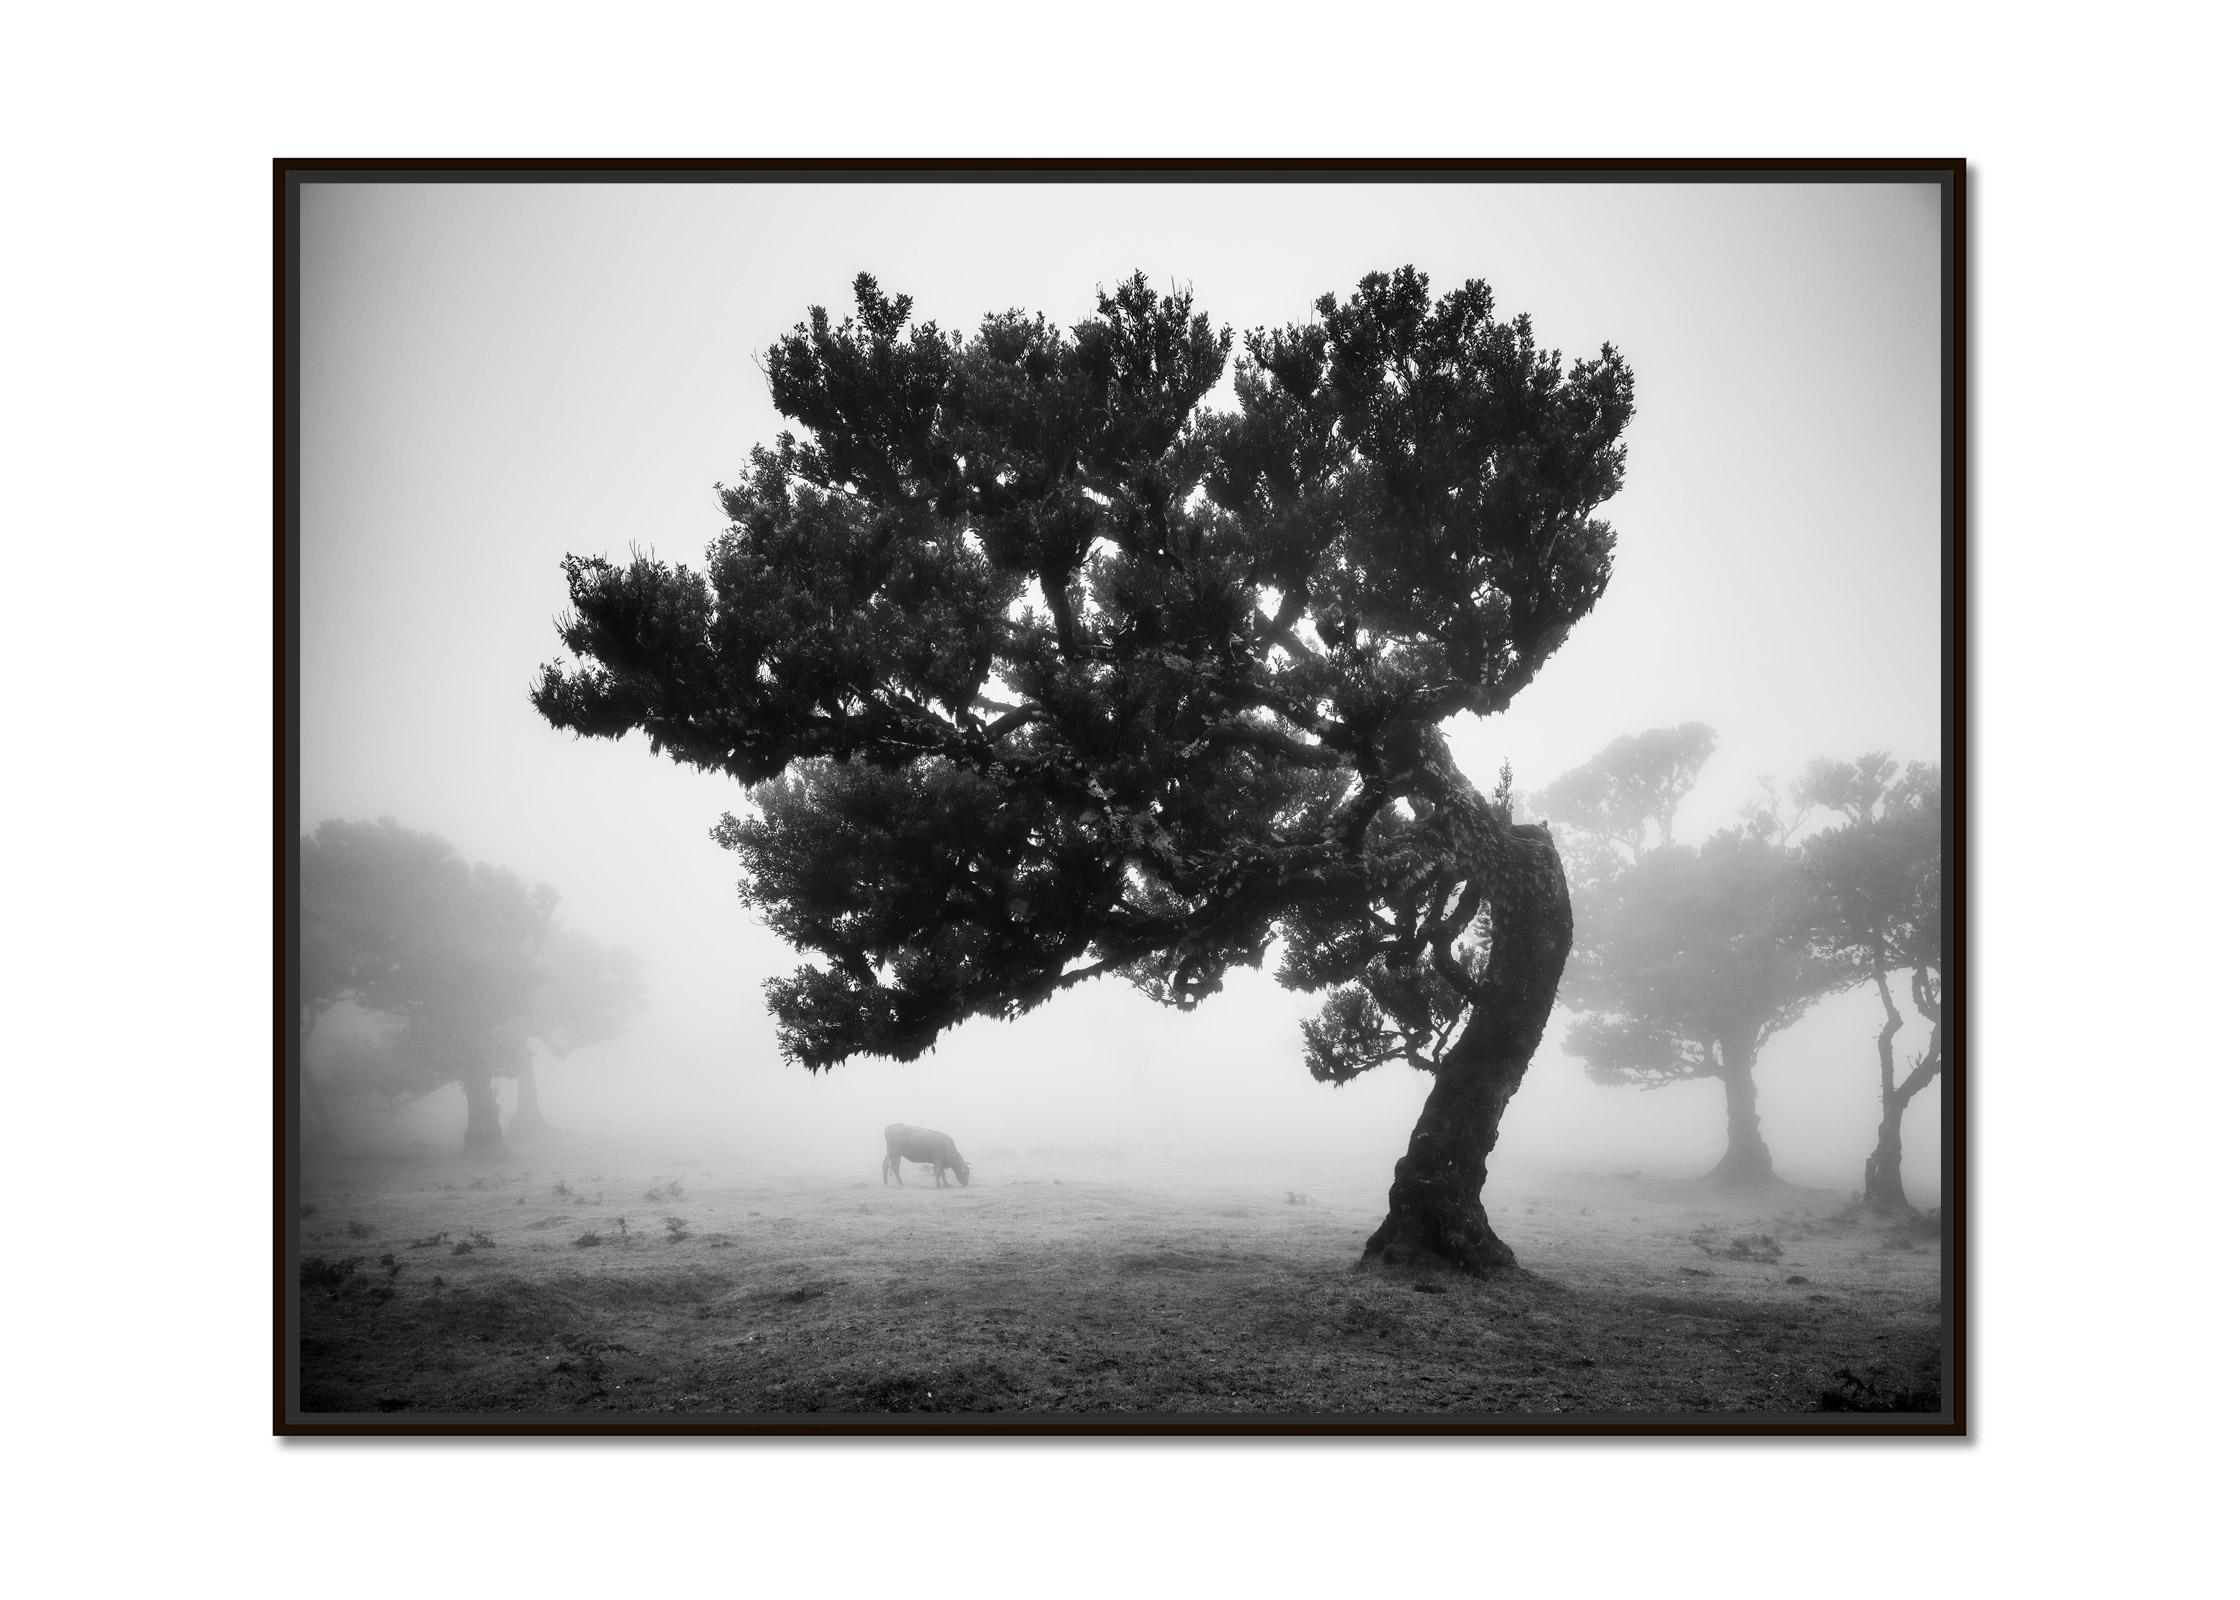 Cows on the foggy Pasture, Portugal, black and white photography, art landscape - Photograph by Gerald Berghammer